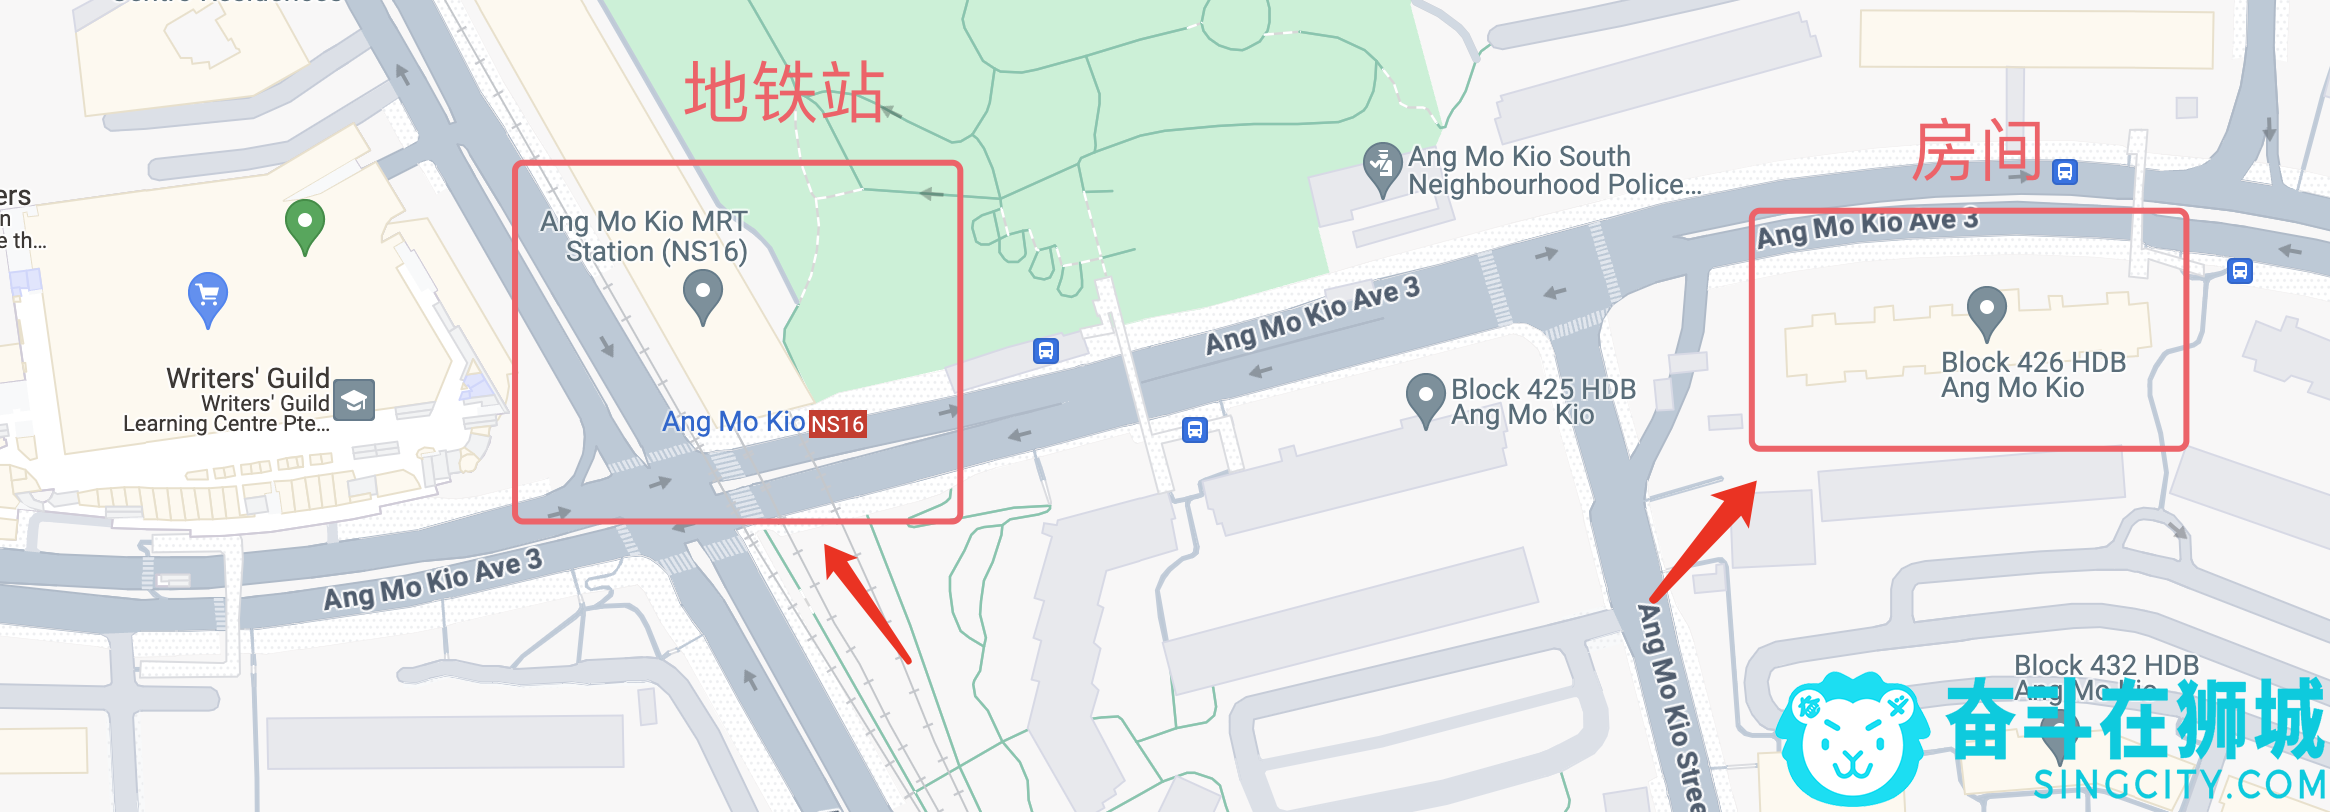 Blk 426 Room Location.png